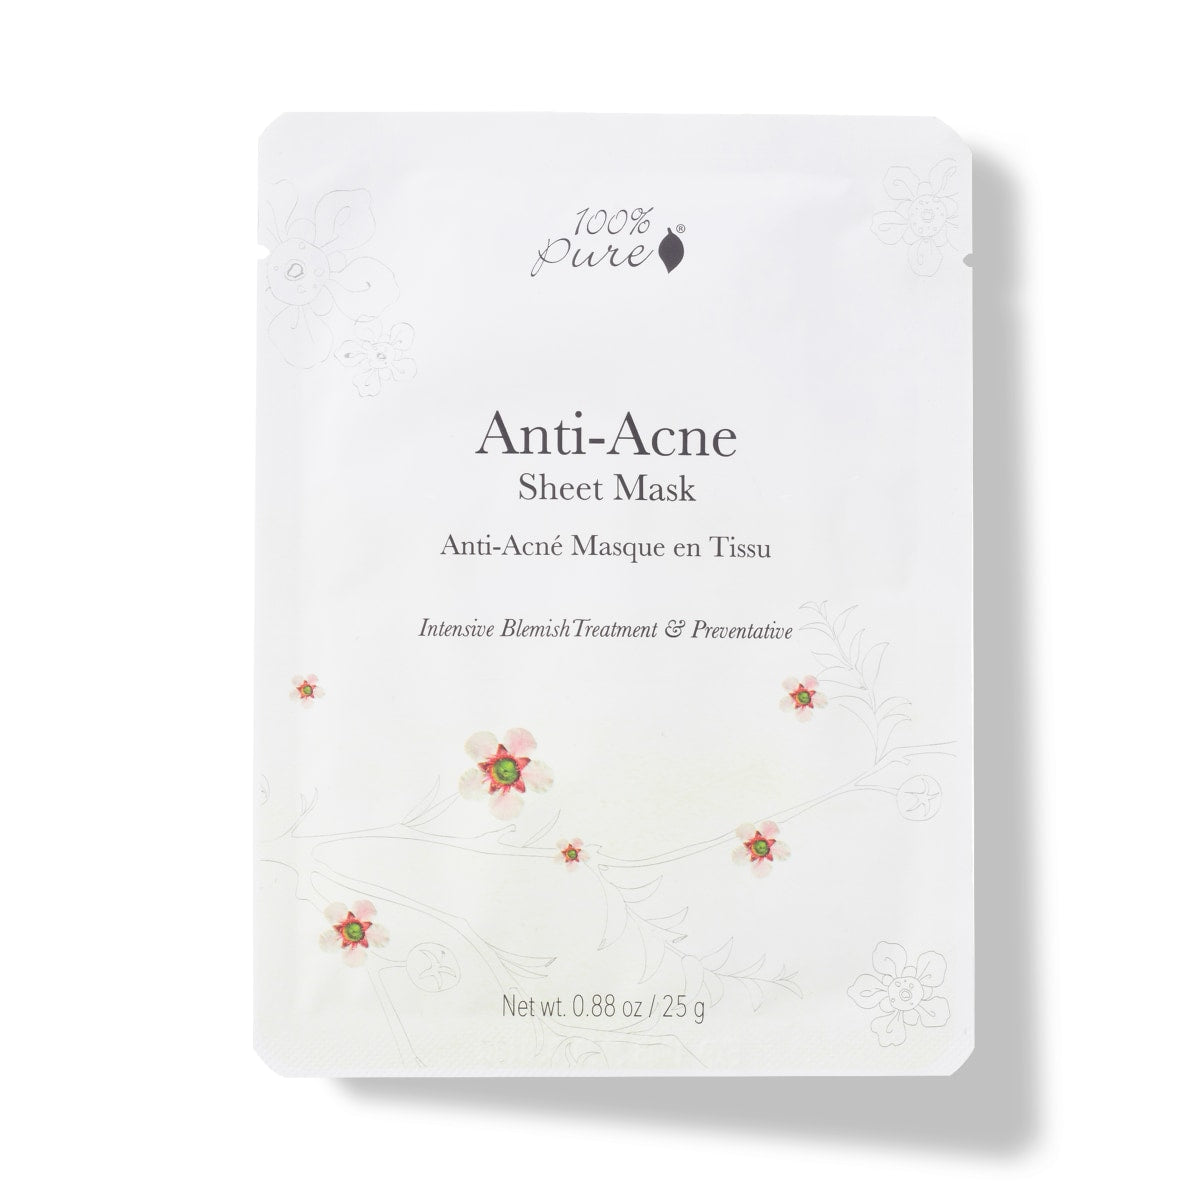 Anti Acne Sheet Mask, break-outs, purify pores, 100% Pure,face ,healing, calming, antibacterial, plant extracts, soothe, smooth, blemishes, clarify, clear up, clarifying, sheet mask, Salicylic Acid, natural, Tea Tree, Parsley, Rosemary, unclog pores. Seaweed, Basil, detoxify,plant ceramids,Hyaluronic Acid, redness, cool, irritated skin, silky smooth, deeply nourished,  eco-friendly, natural, antibacterial bamboo, free from toxins, artificial fragrances, harmful ingredients,Nourished, nourishedeu